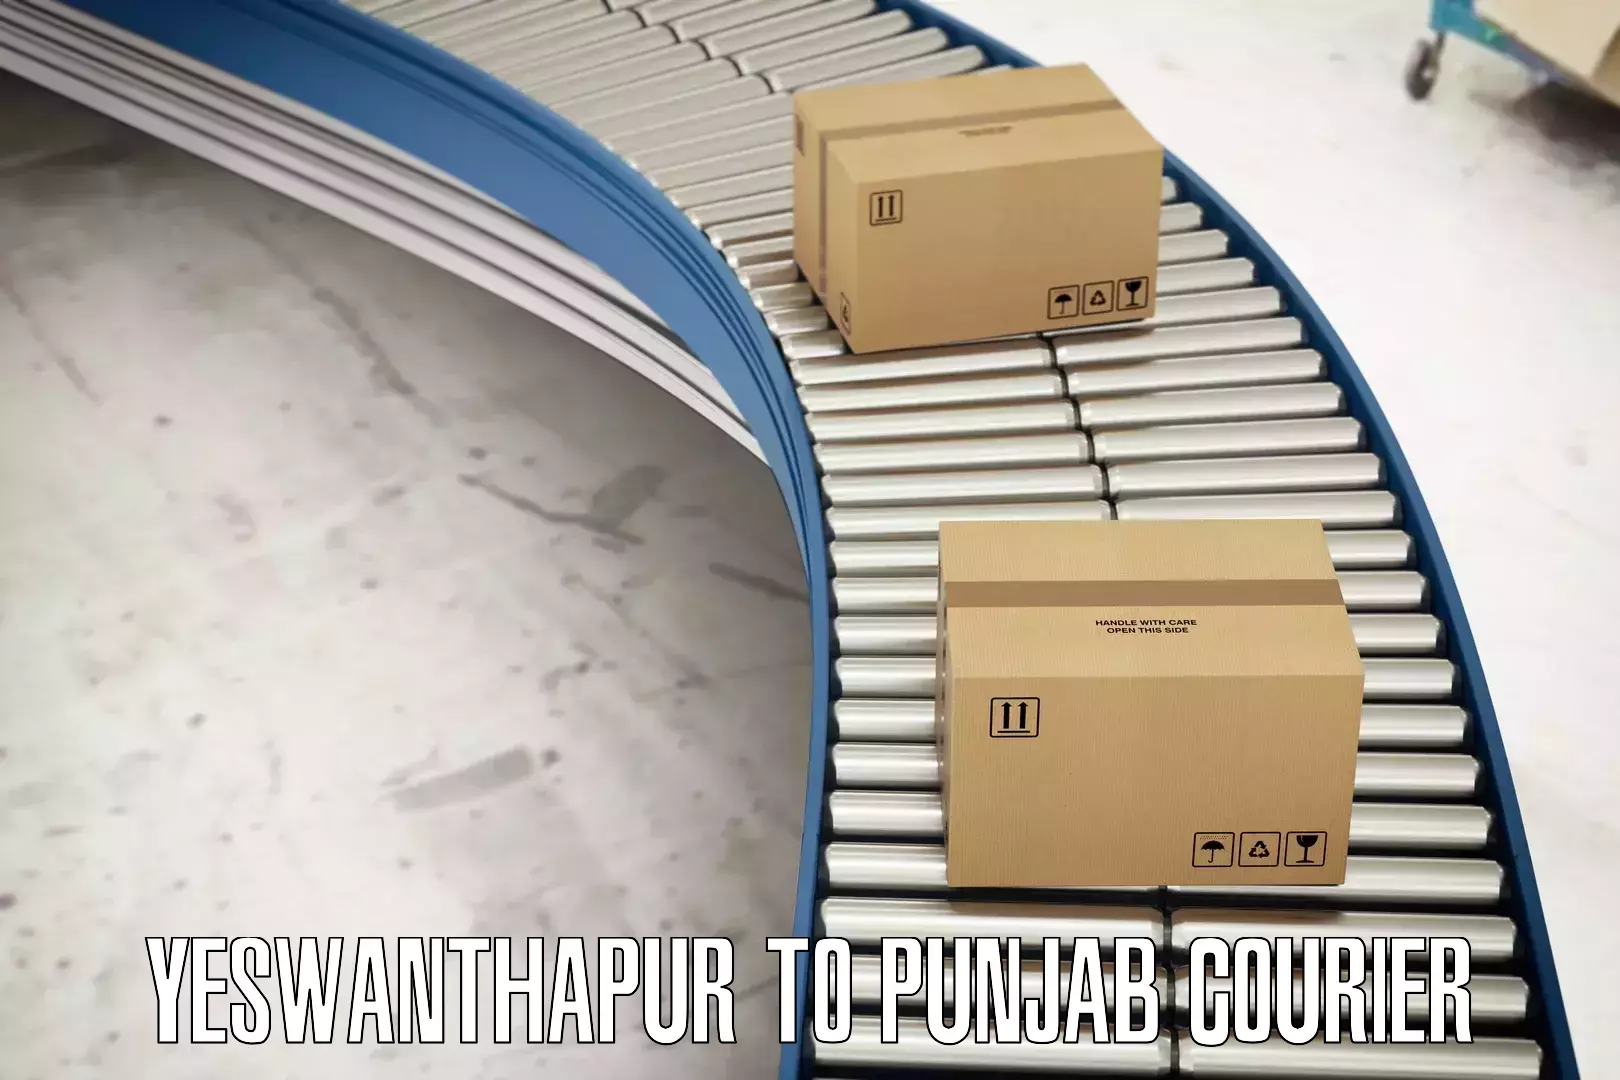 Online shipping calculator Yeswanthapur to Punjab